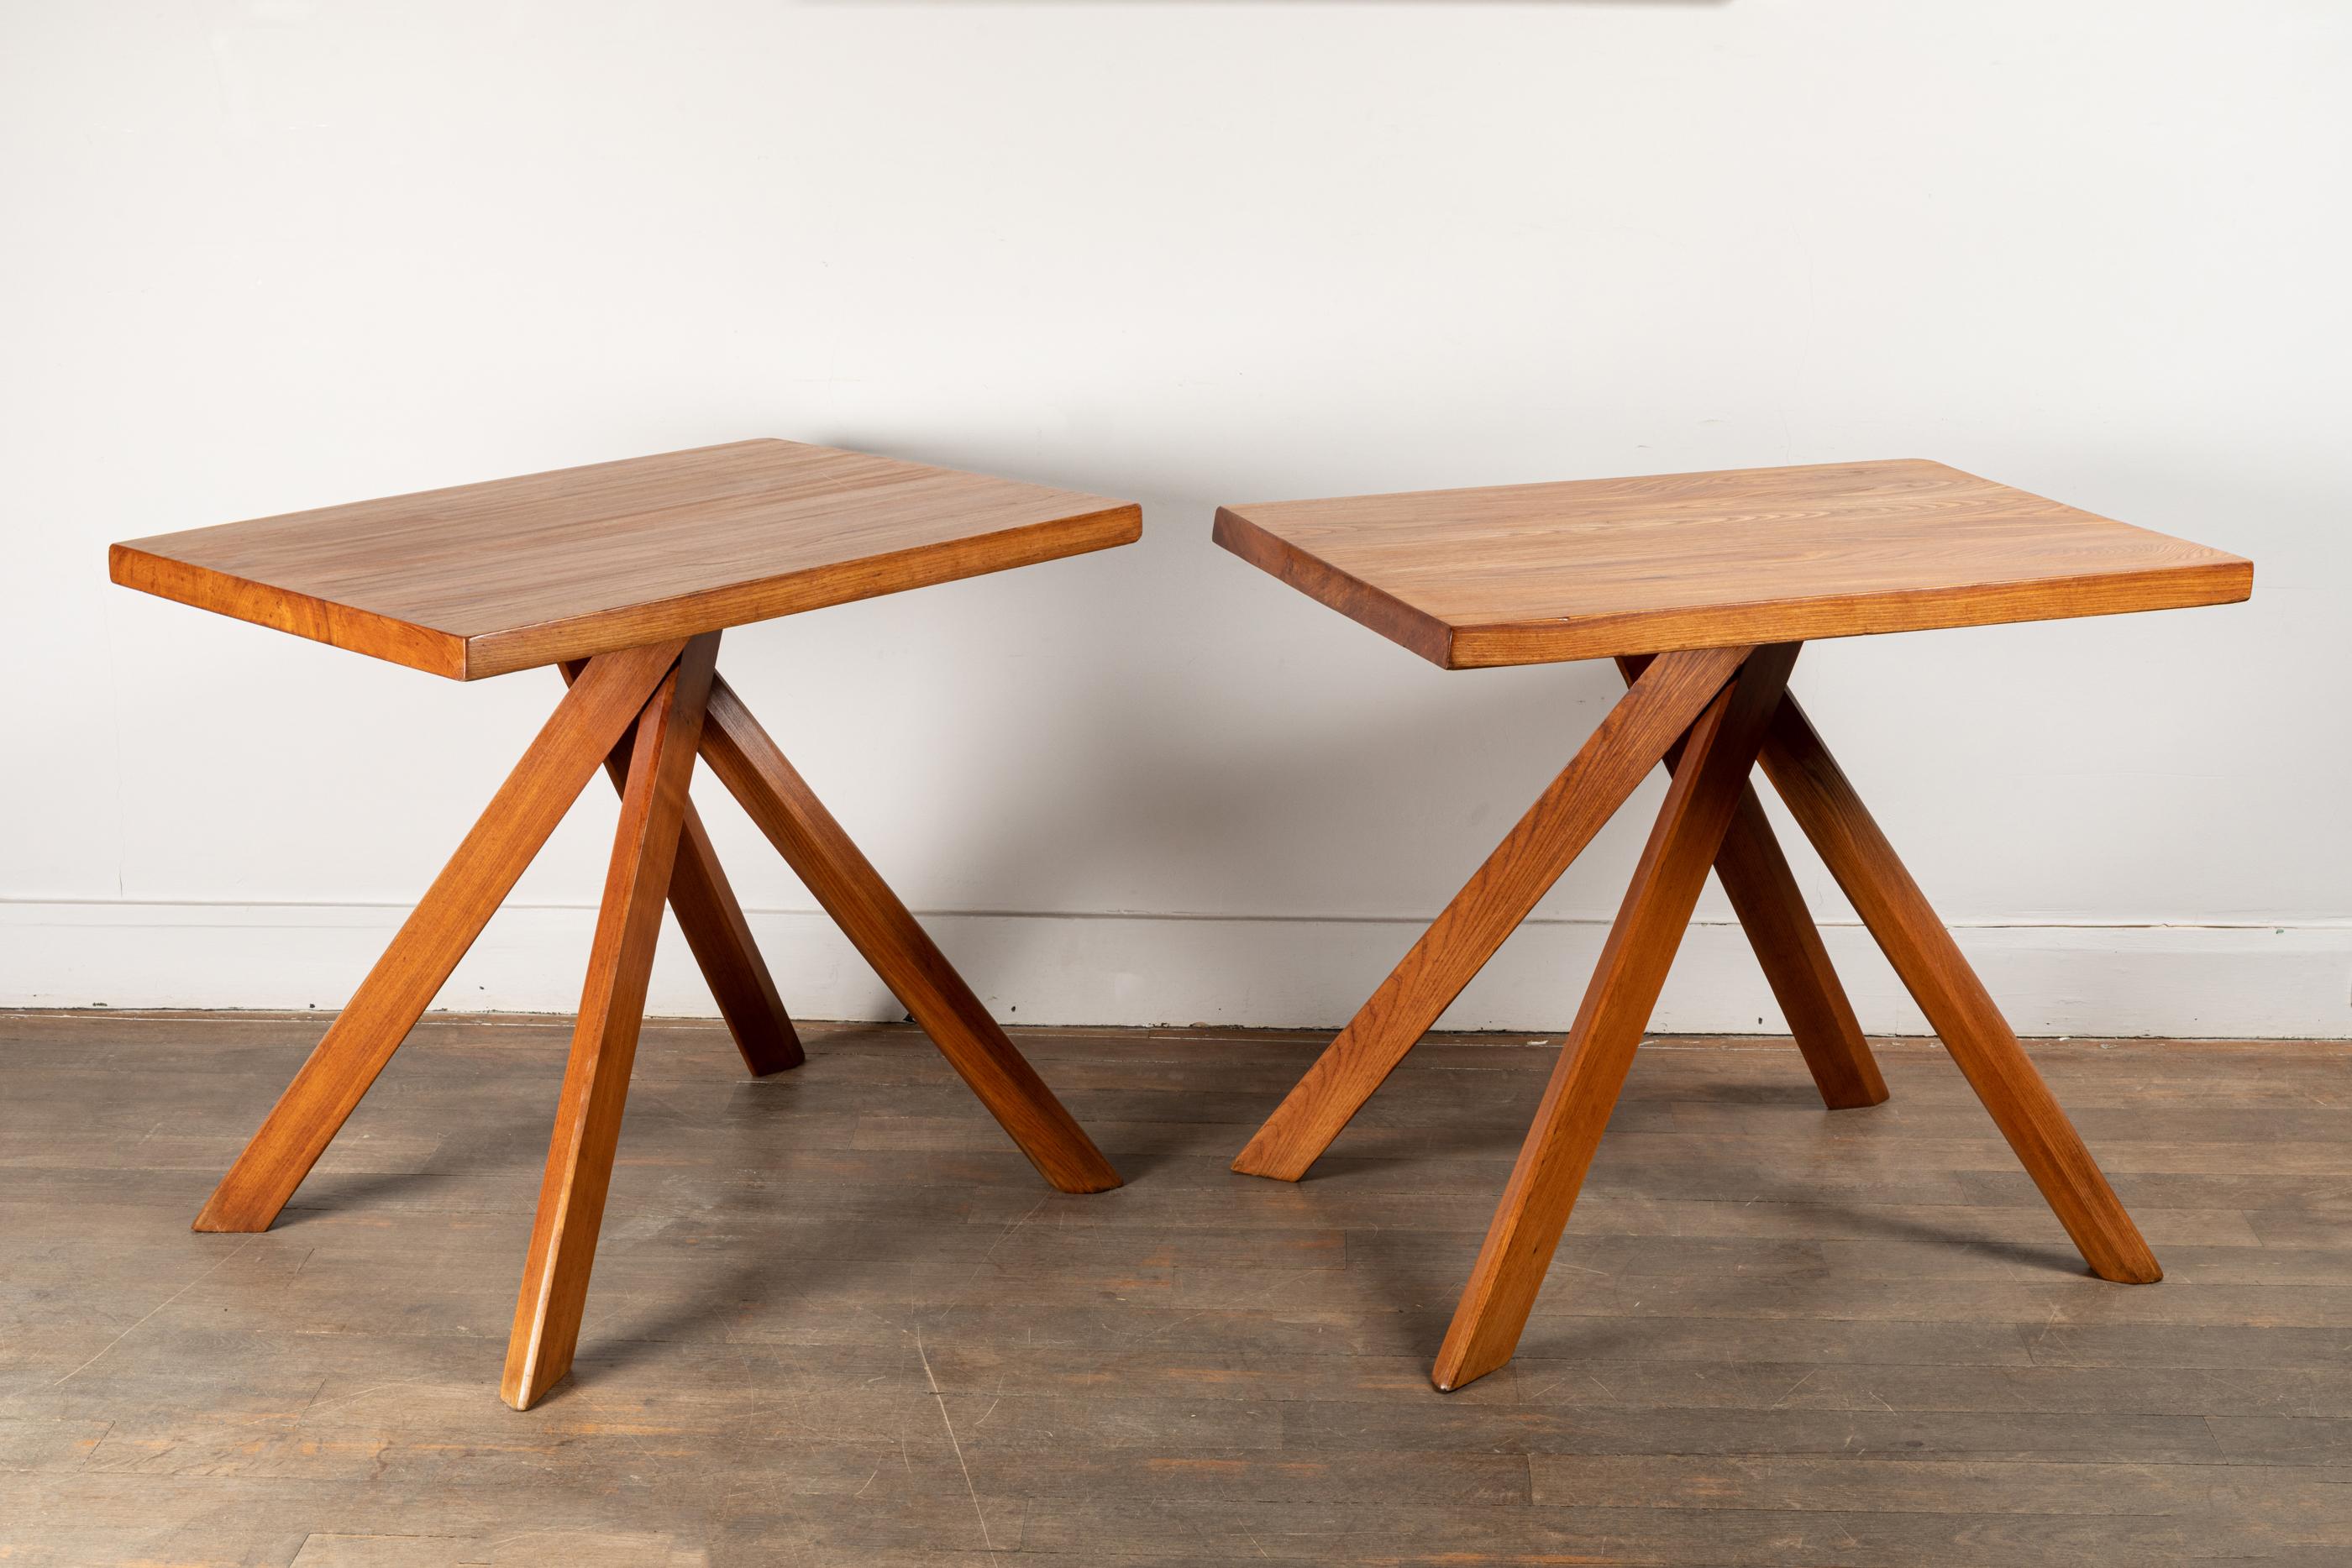 Pair of elm tables, model T27A, named 'Rectangulaire Duo'
By Pierre Chapo ( 1927-1987)
 
Thick top in solid elm wood on 4 feet.
France, circa 1960.

Measures : 
Height 28.5 inches (72.5 cm)
Width 32.3 inches (82 cm)
Depth 24 inches (61